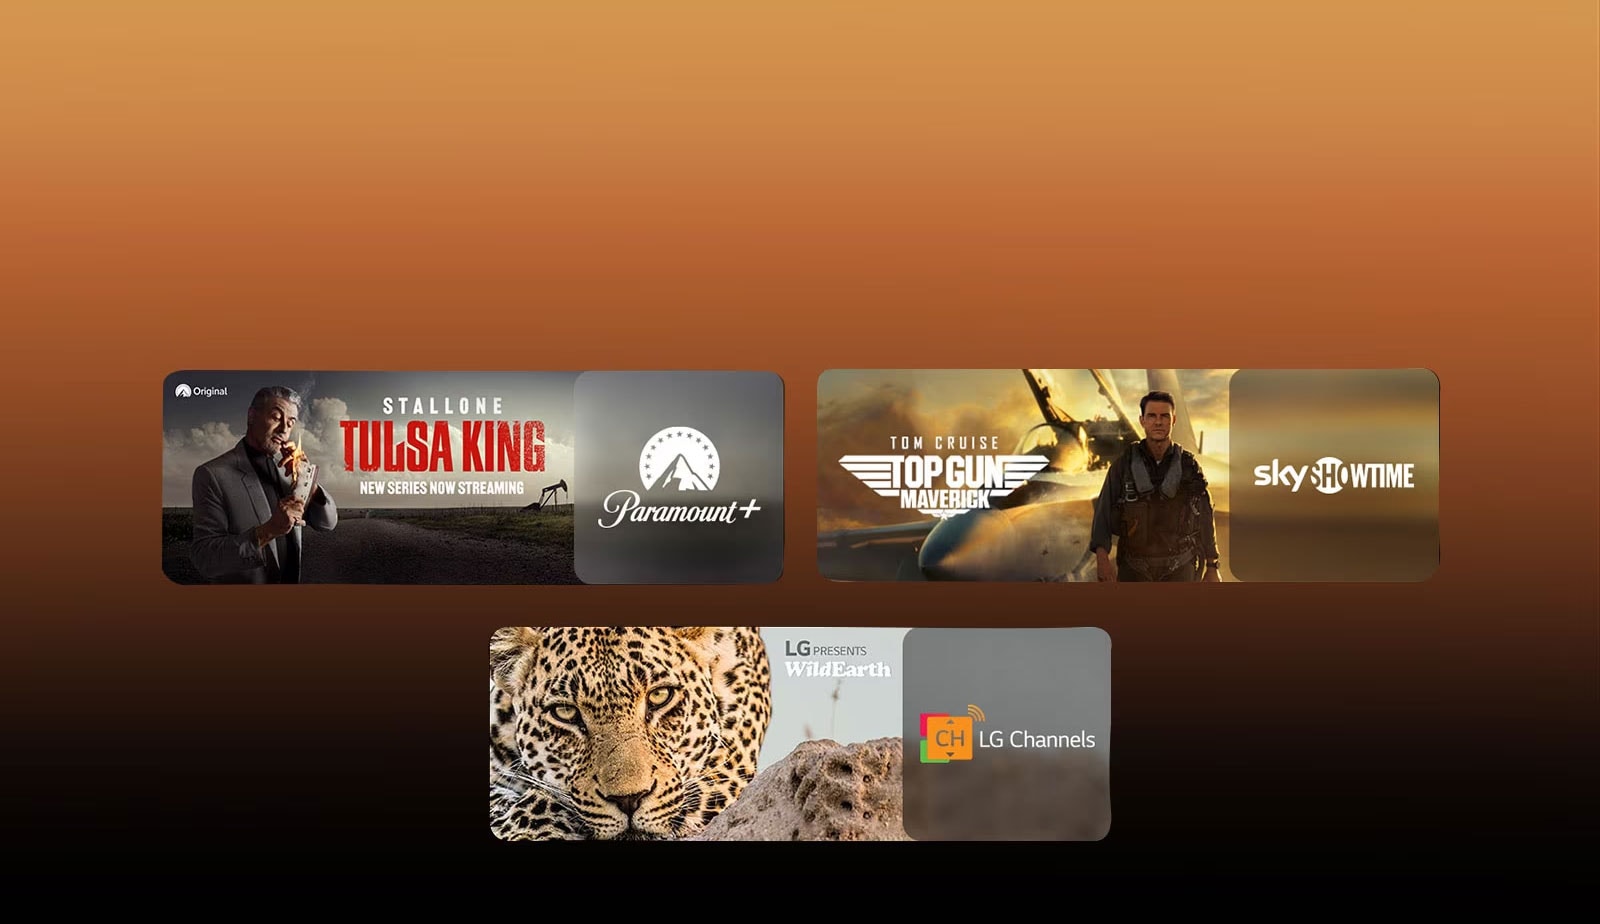 There are logos of streaming service platforms and matching footages right next to each logo. There are images of  Paramount+'s Tulsa King, Dsky showtime's TOP GUN, and LG CHANNELS' leopard.